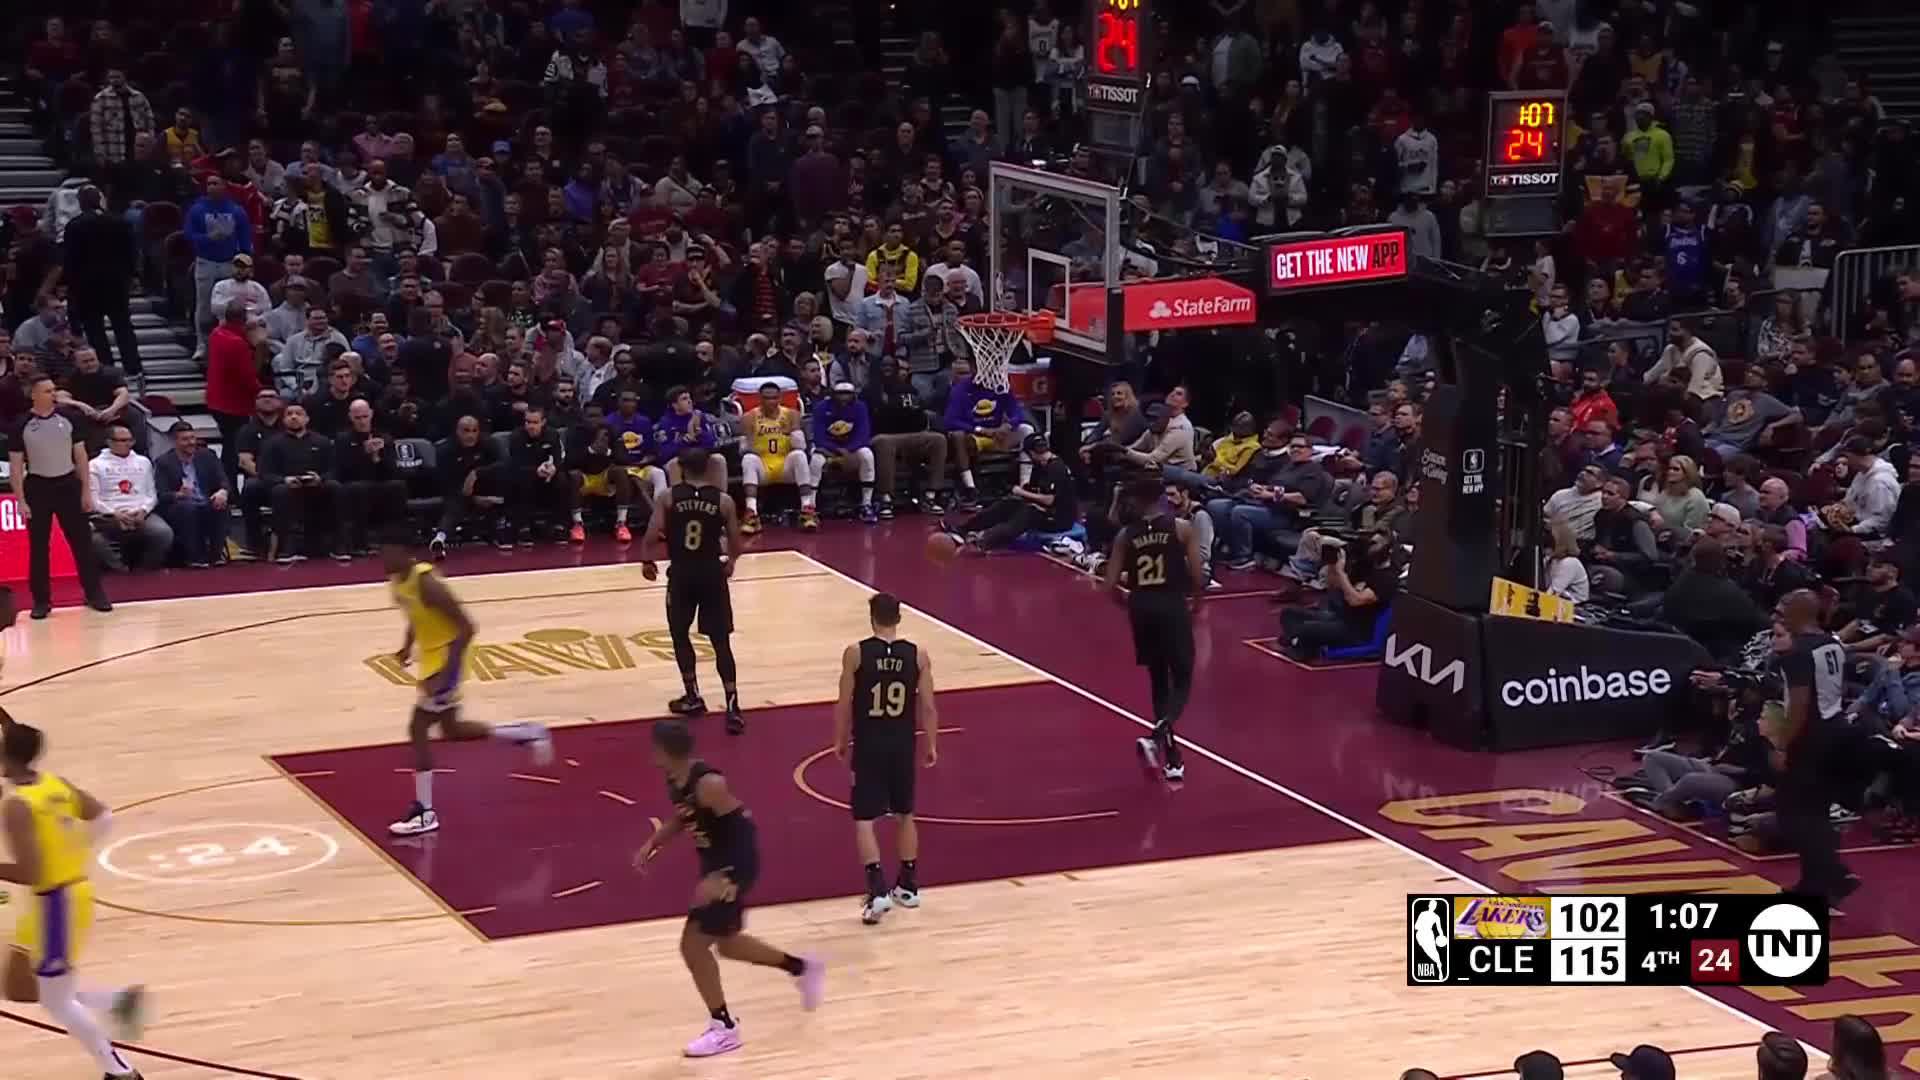 Thomas Bryant hammers it home